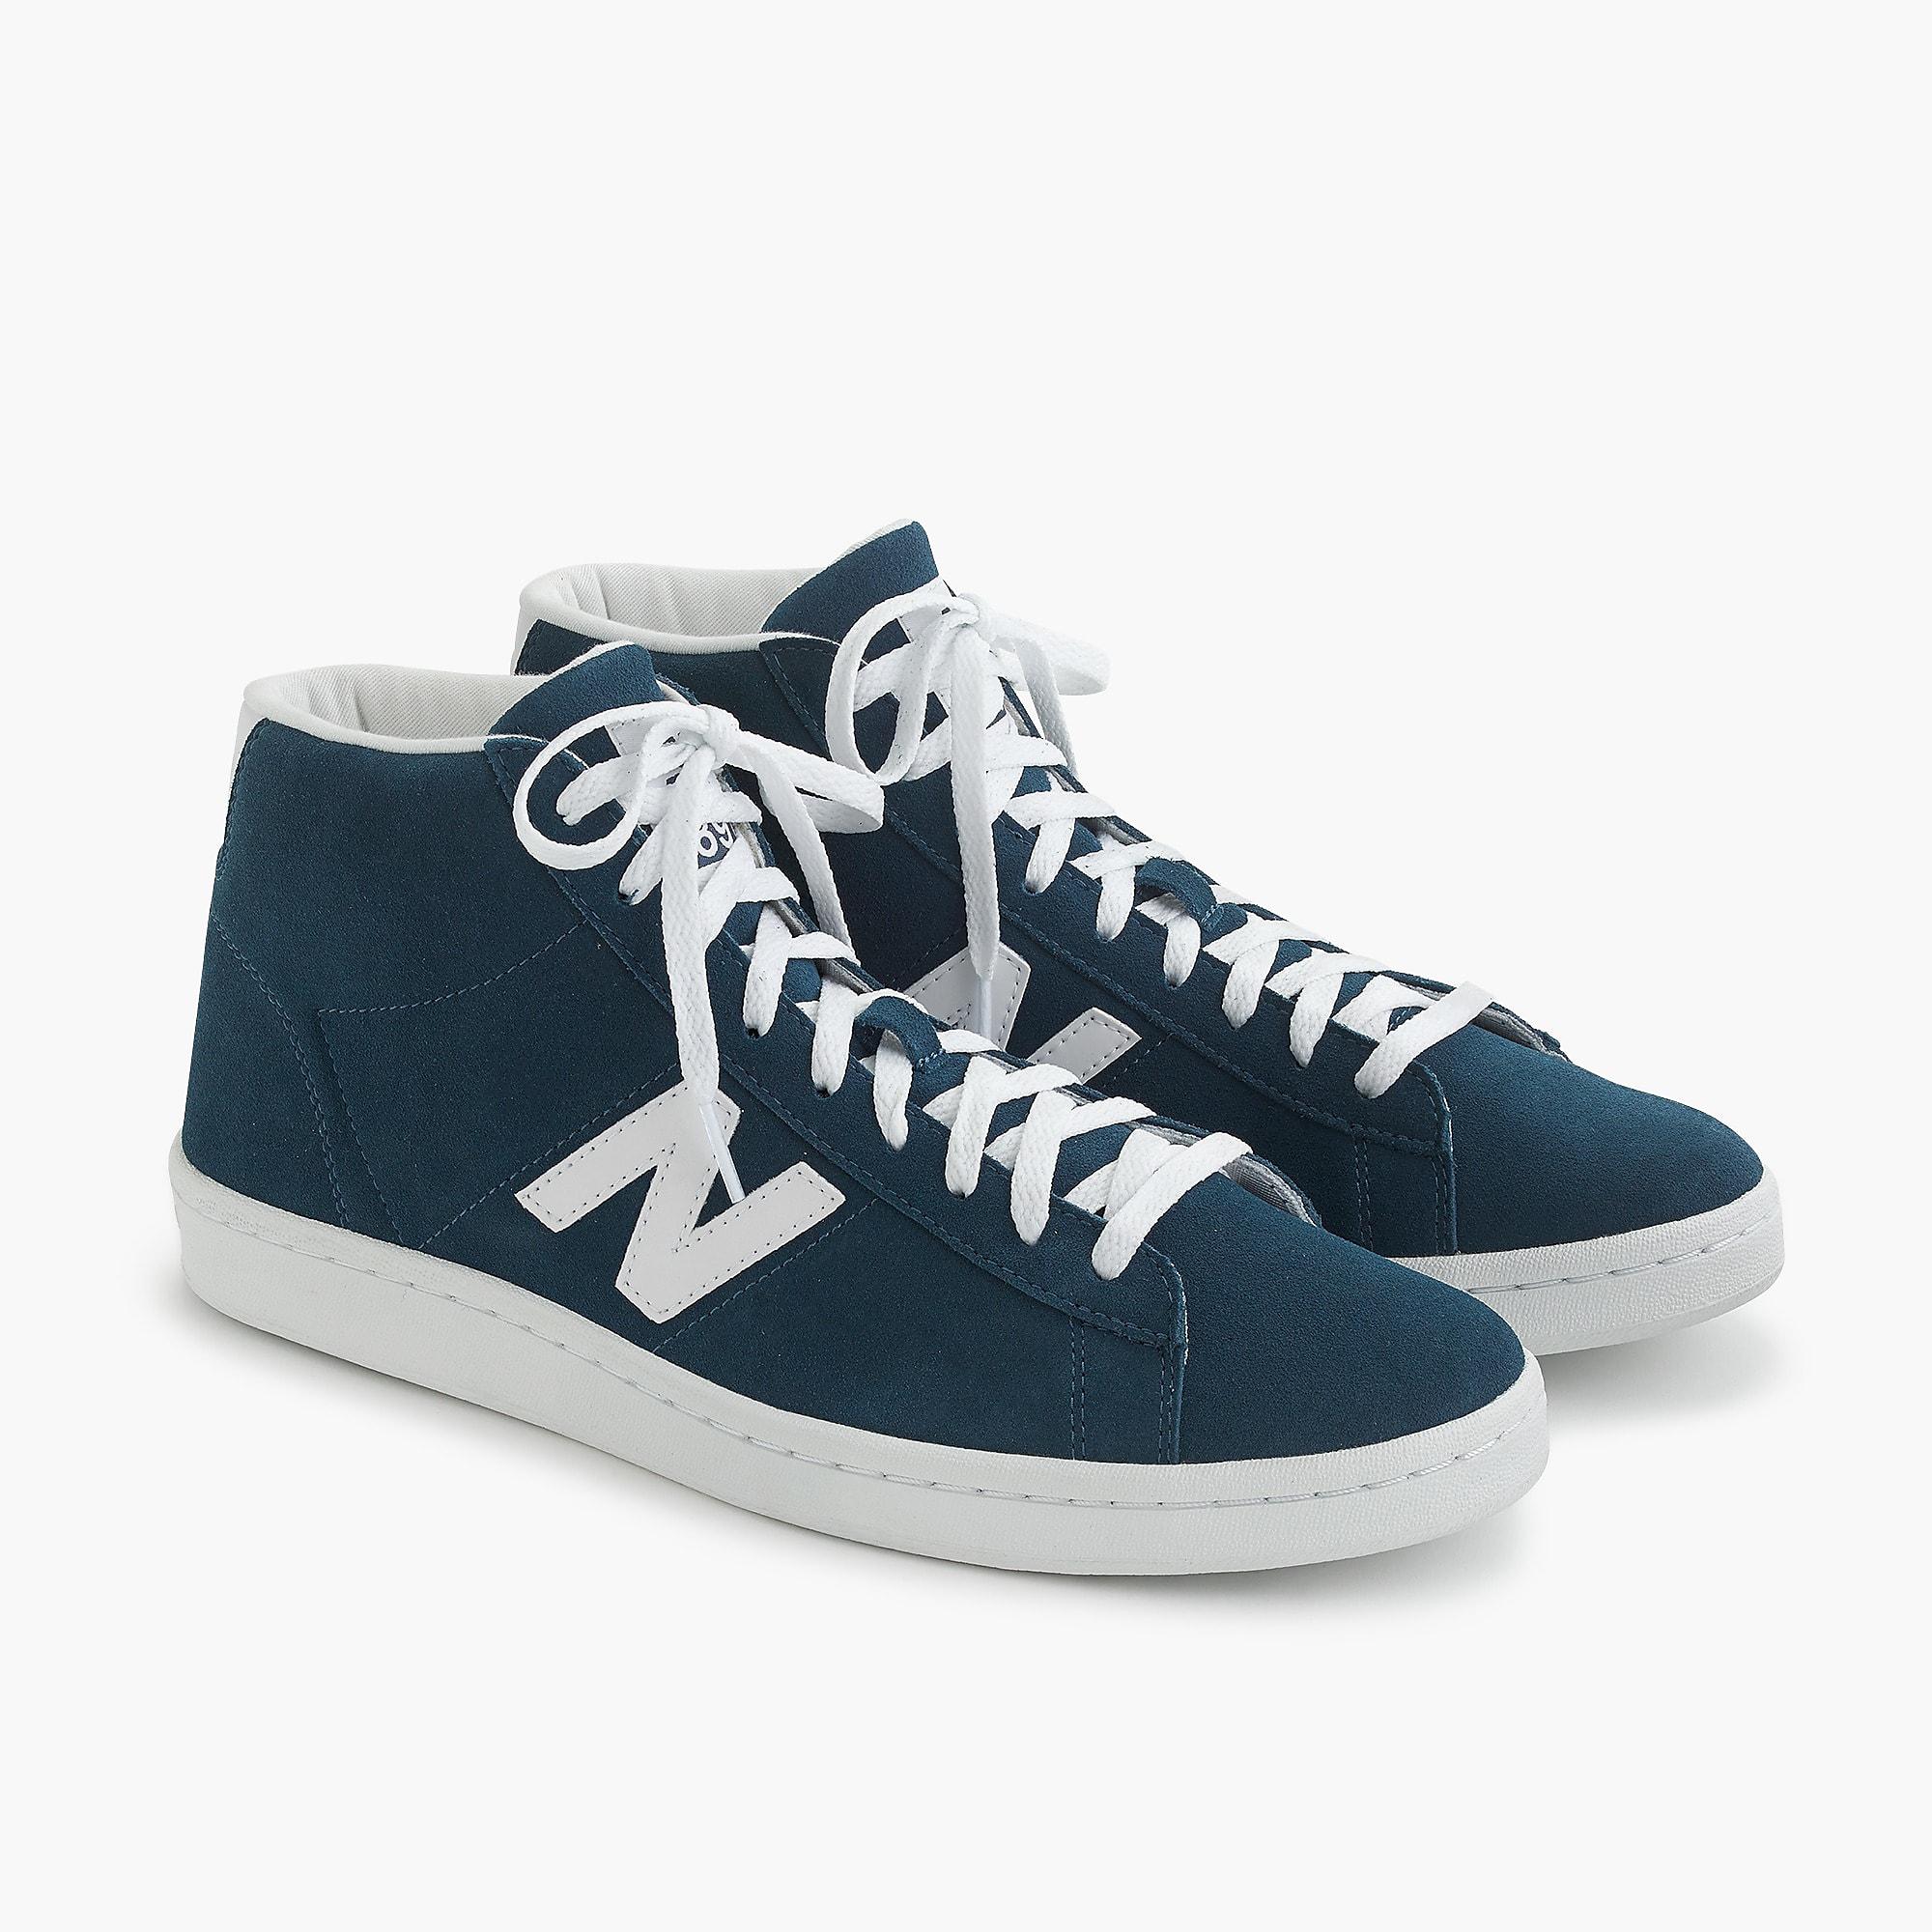 New Balance Suede 891 High-top Sneakers in Indigo (Blue) for Men - Lyst